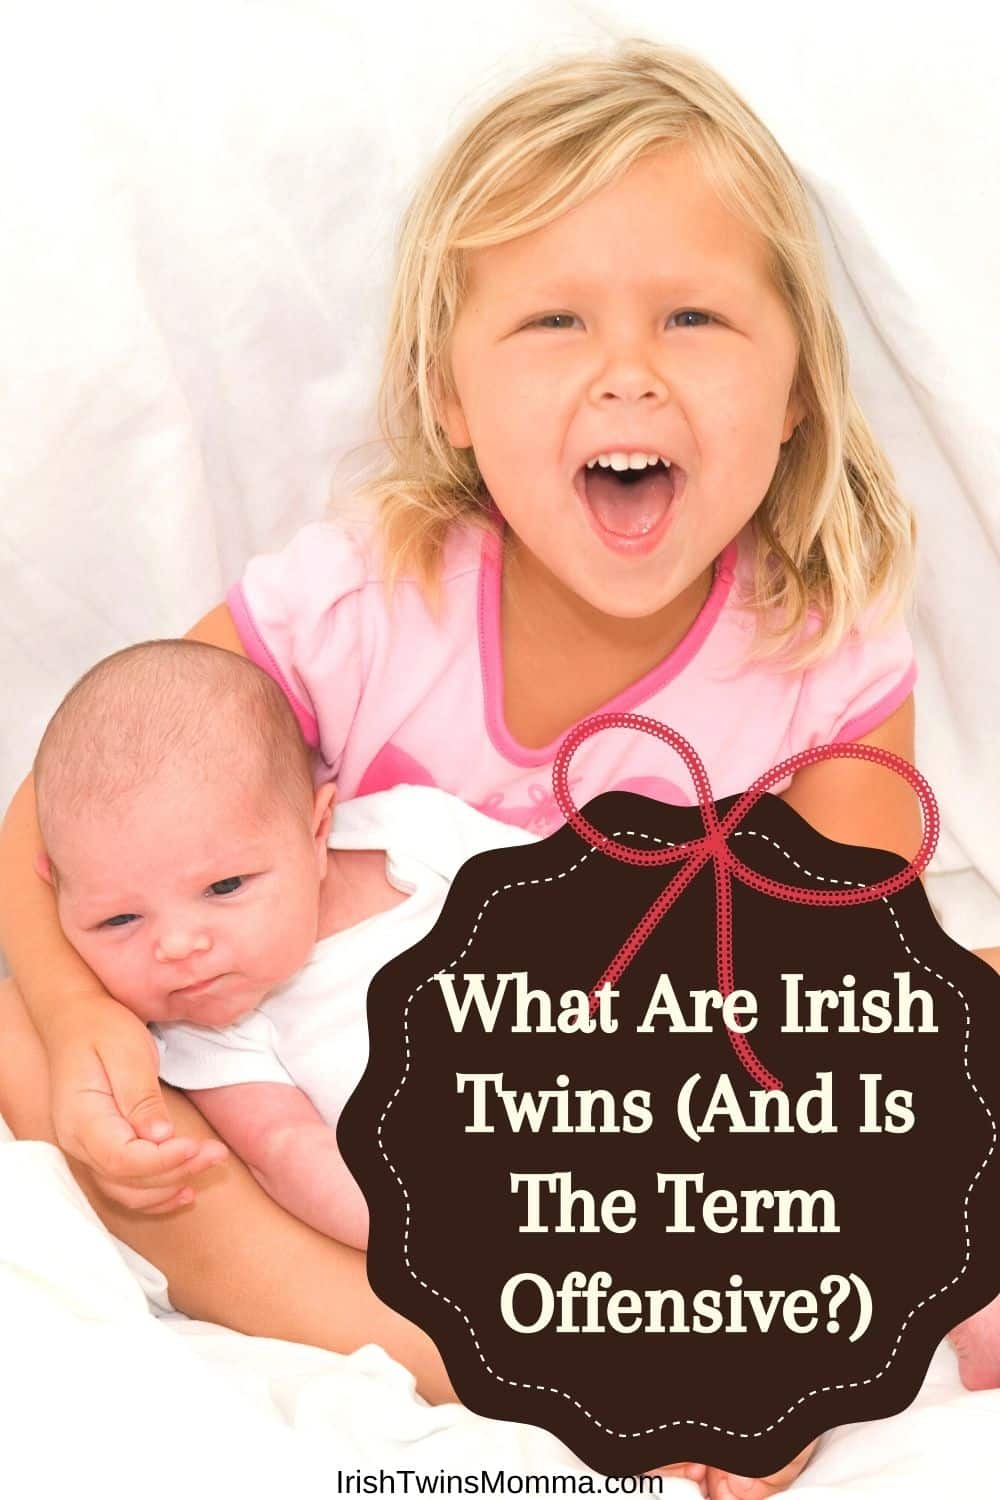 What Are Irish Twins (And Is The Term Offensive)